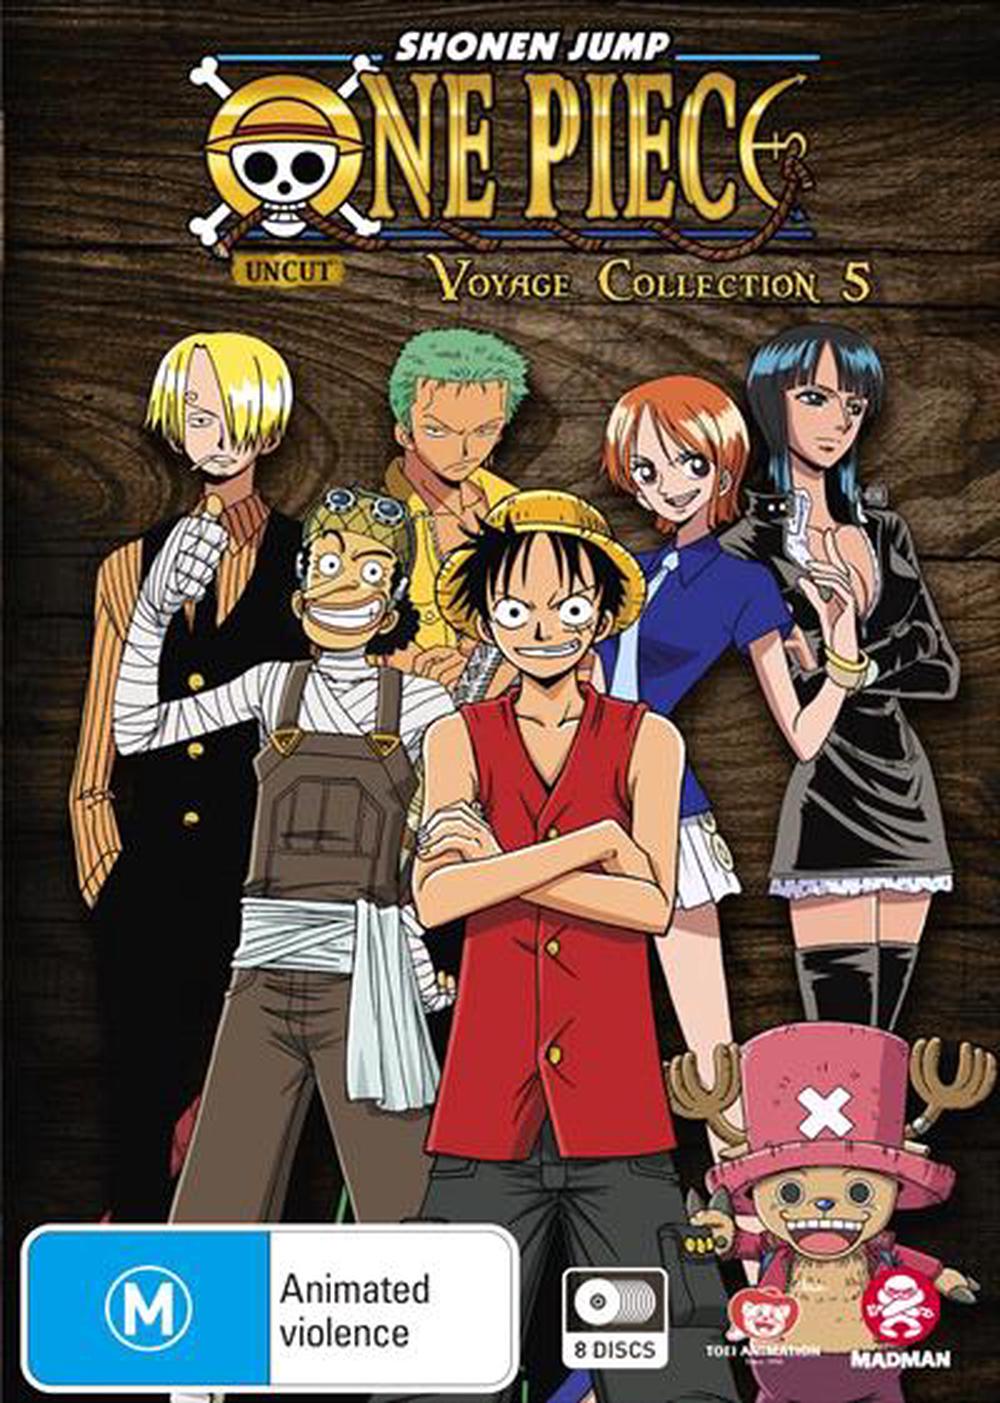 One Piece Voyage Collection 5 Eps 6 252 Dvd Buy Online At The Nile